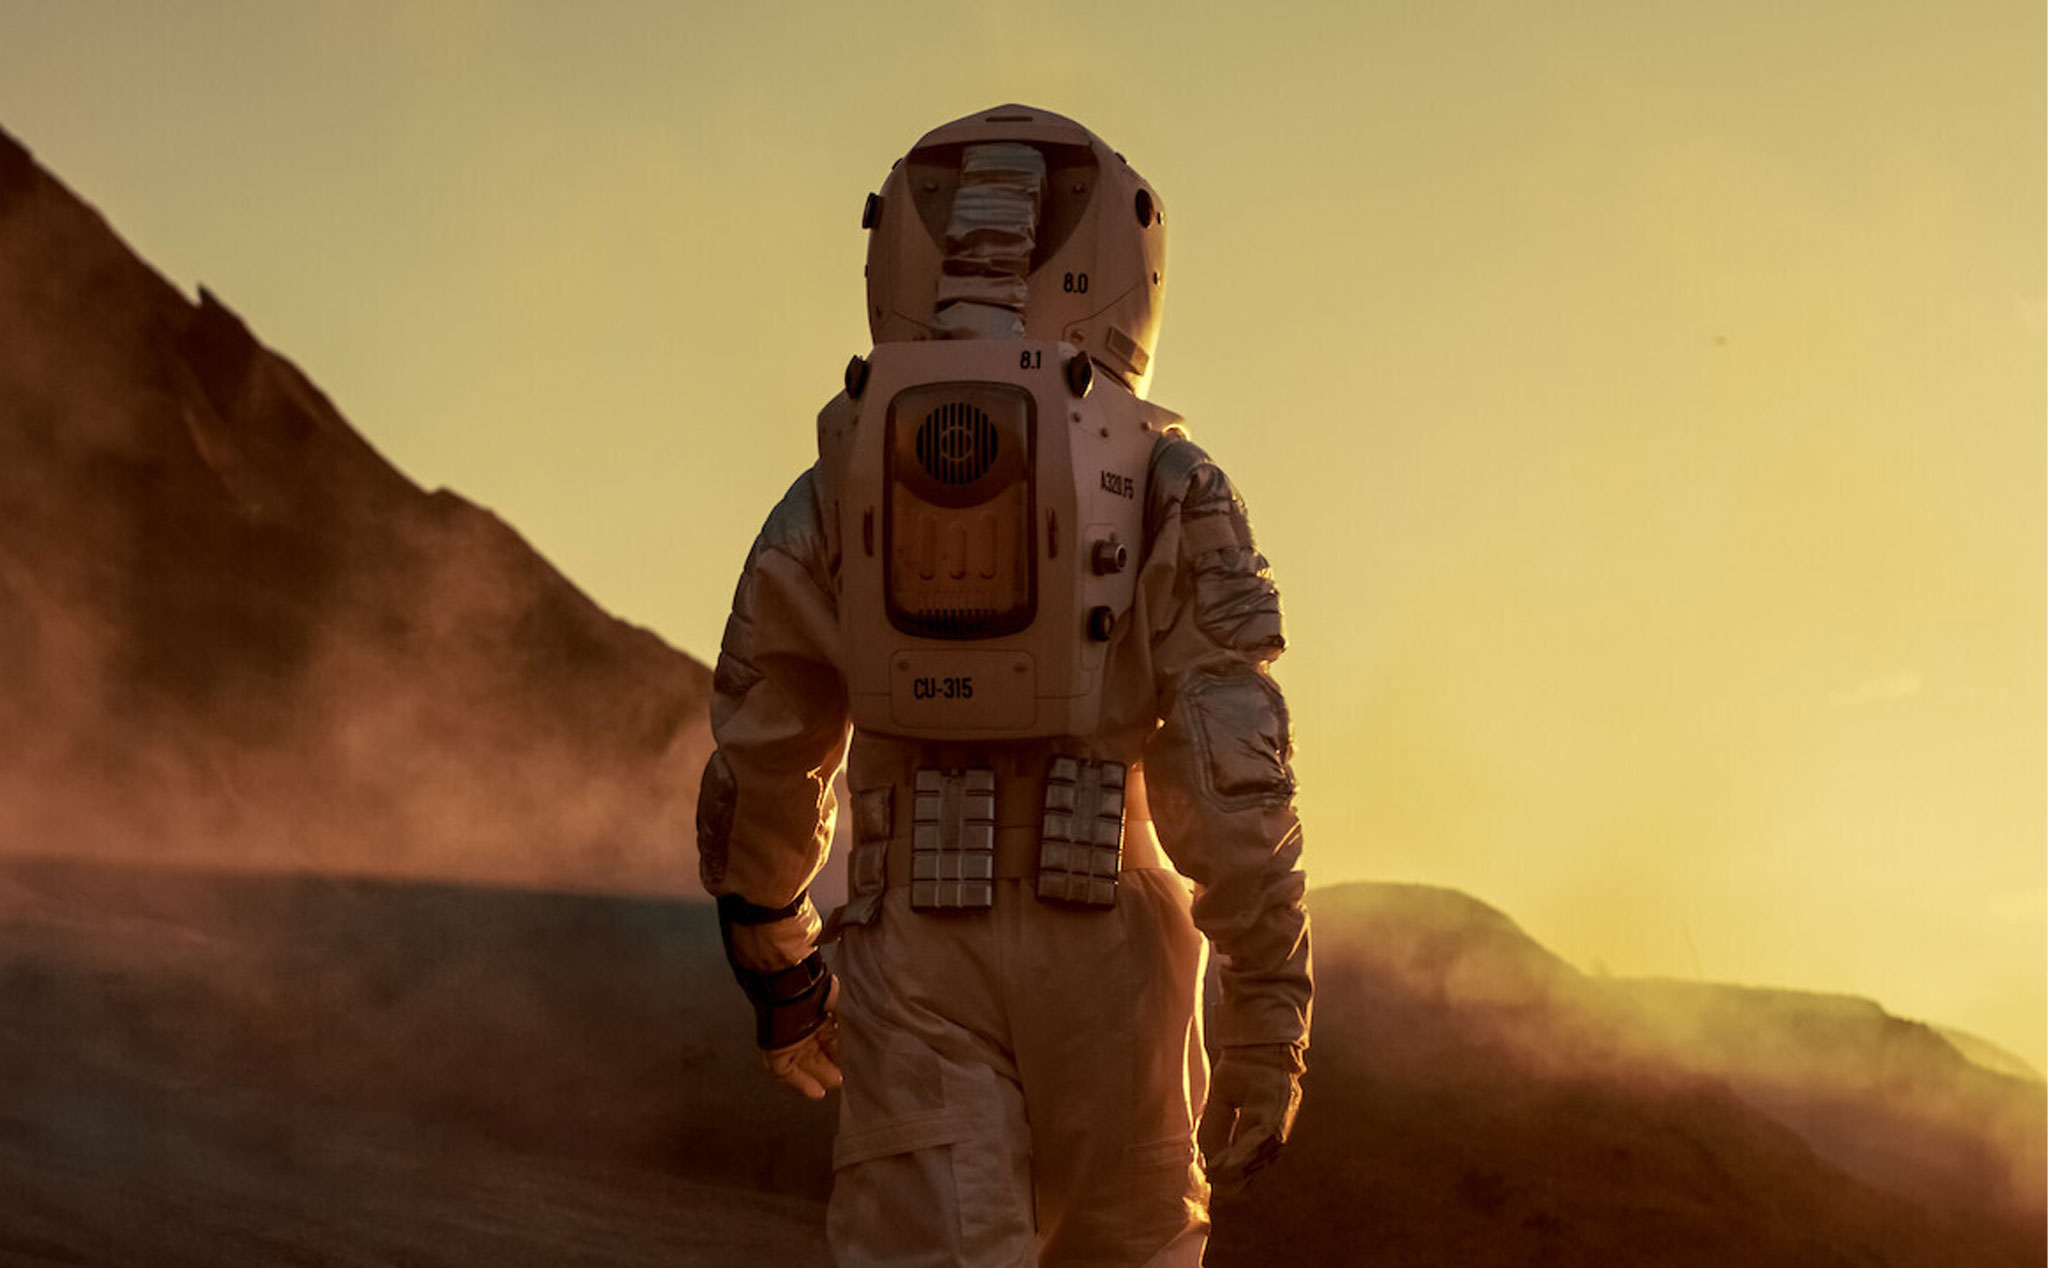 Can humans breathe the air on Mars?